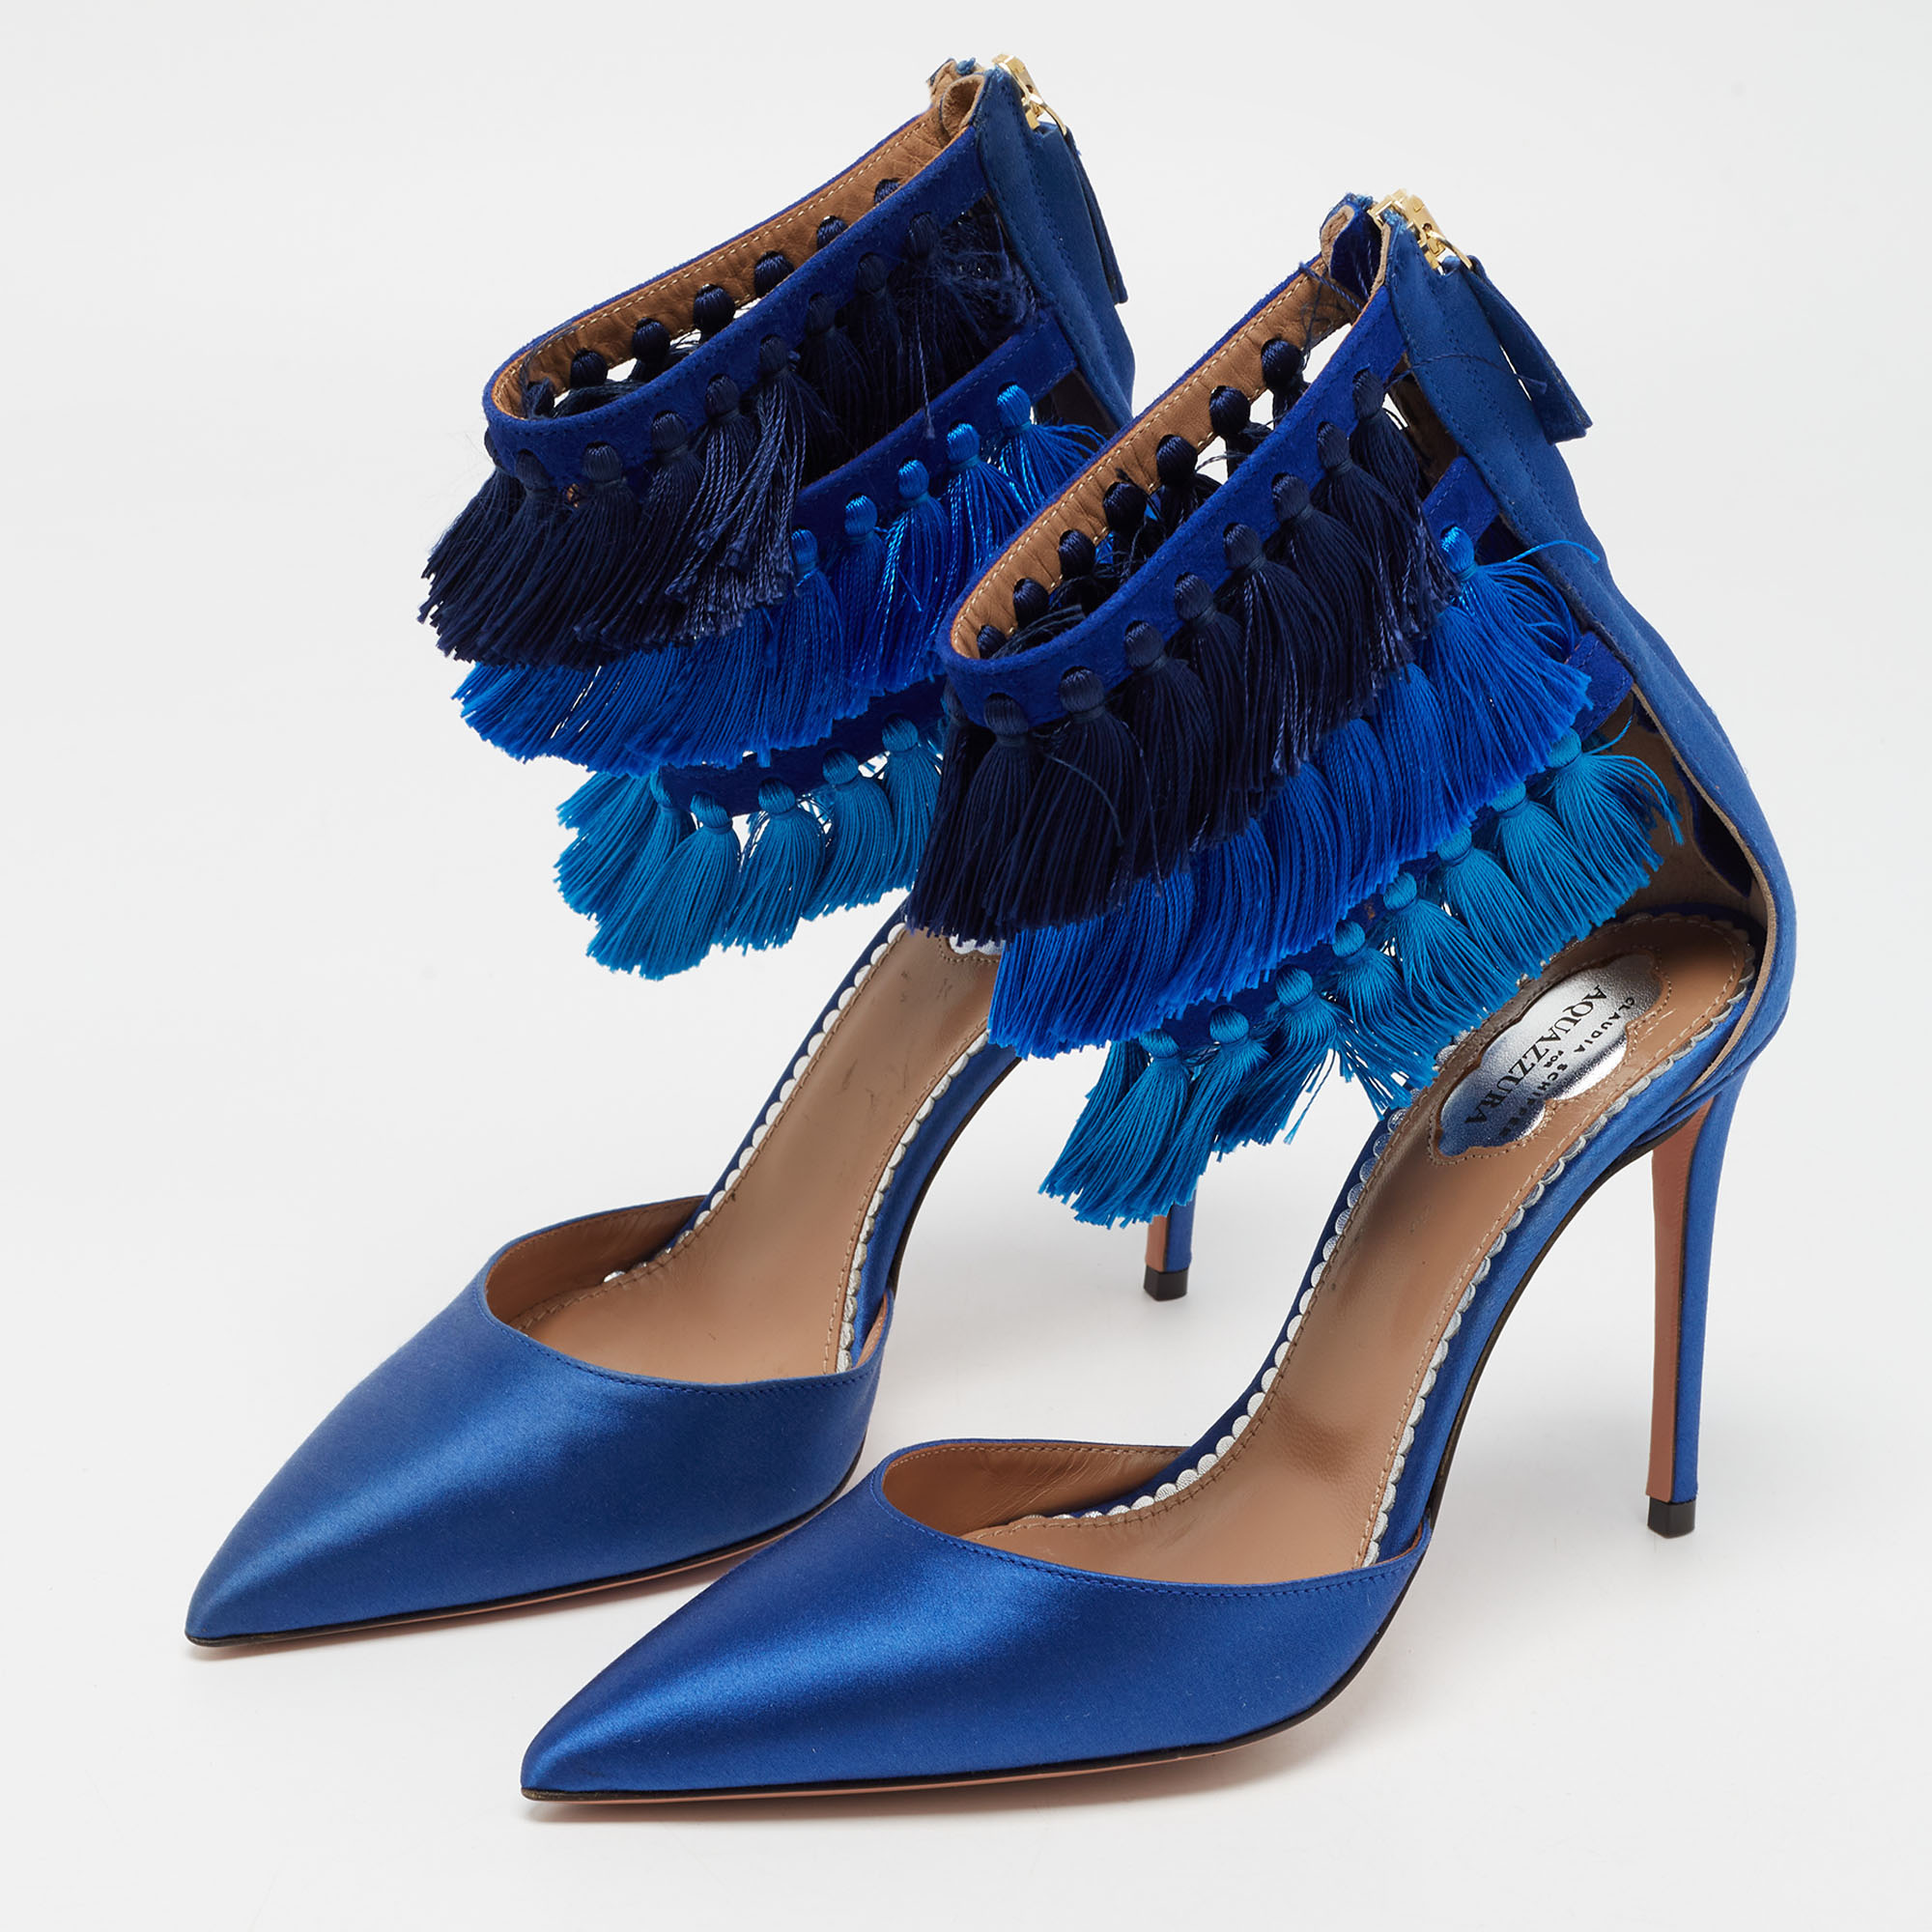 

Claudia Schiffer For Aquazzura Blue Satin And Suede Tasseled Loulou Ankle Cuff Sandals Size